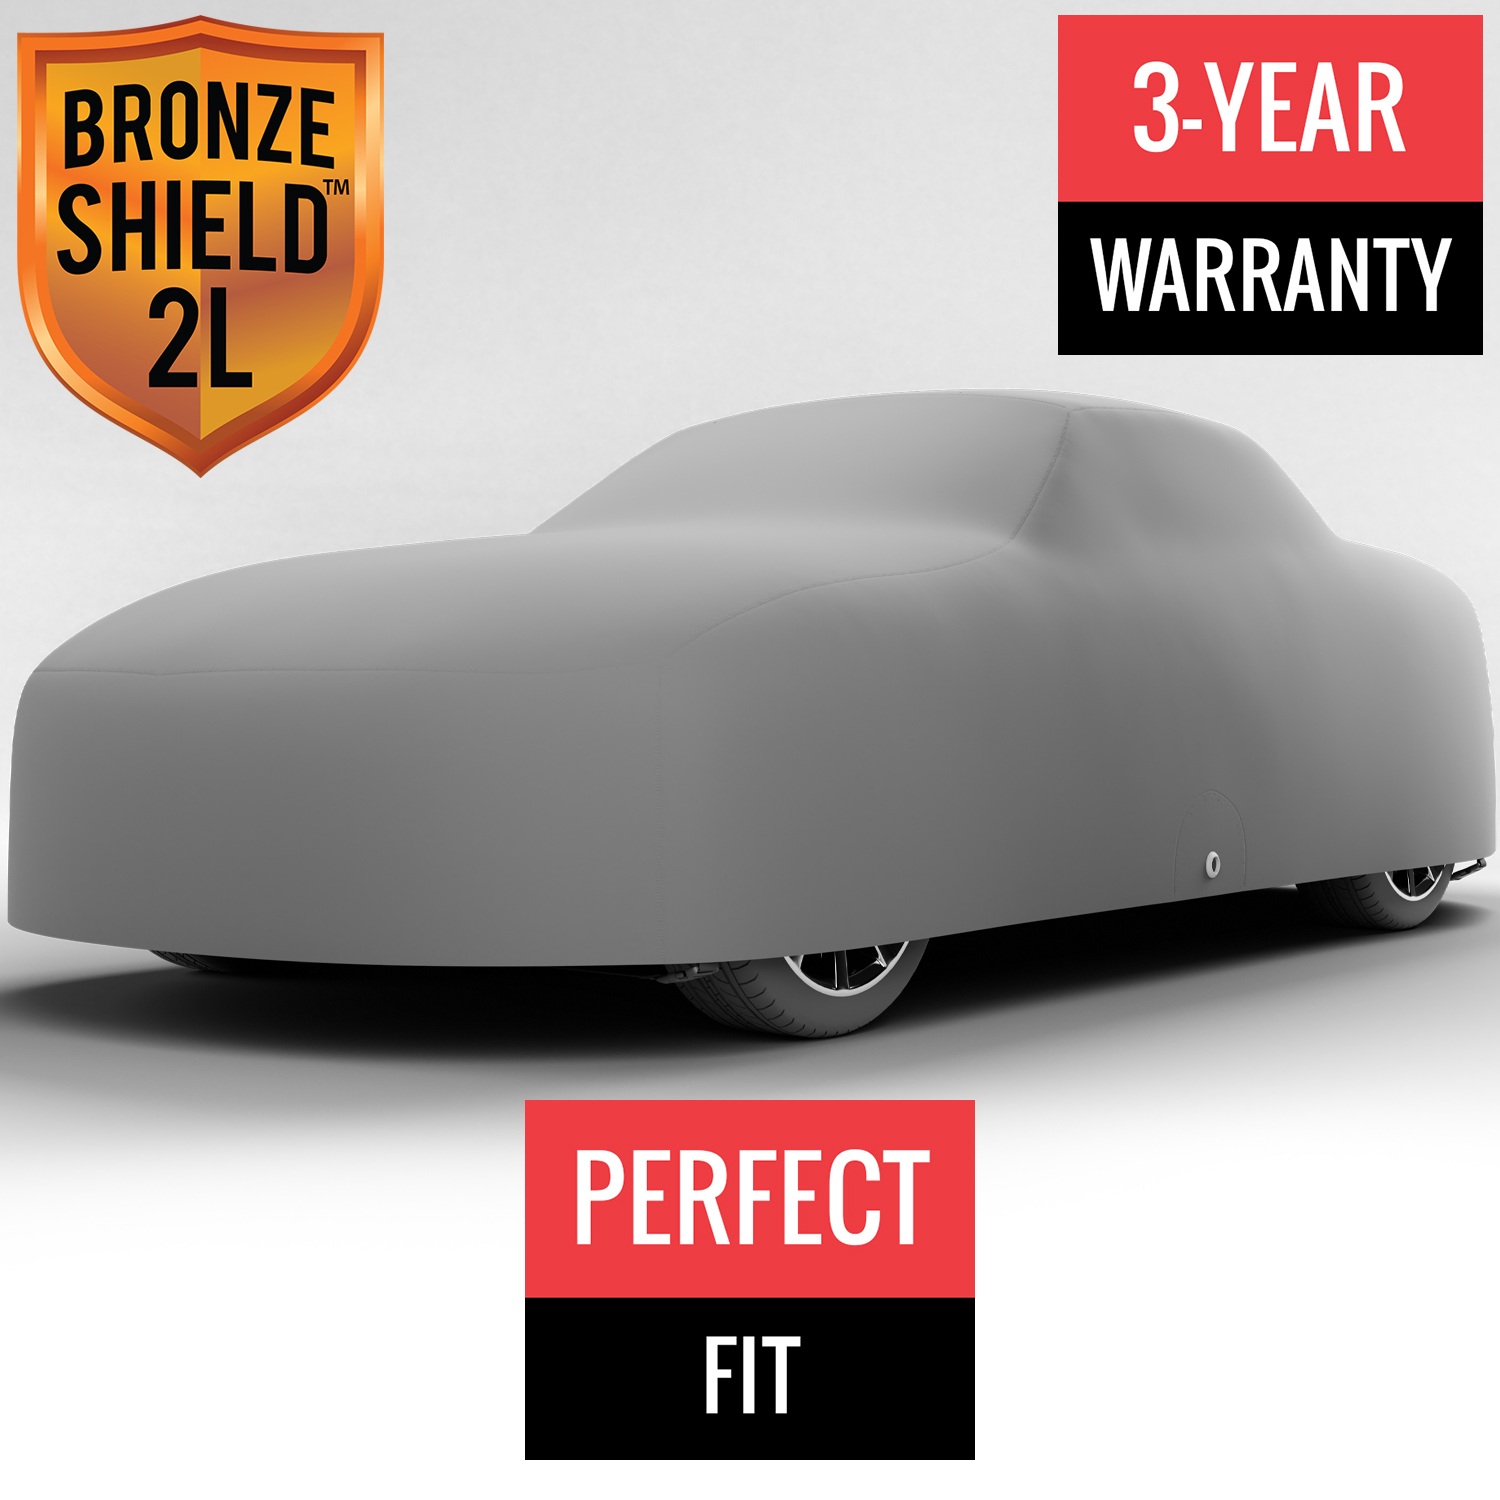 Bronze Shield 2L - Car Cover for Scion FR-S 2016 Coupe 2-Door